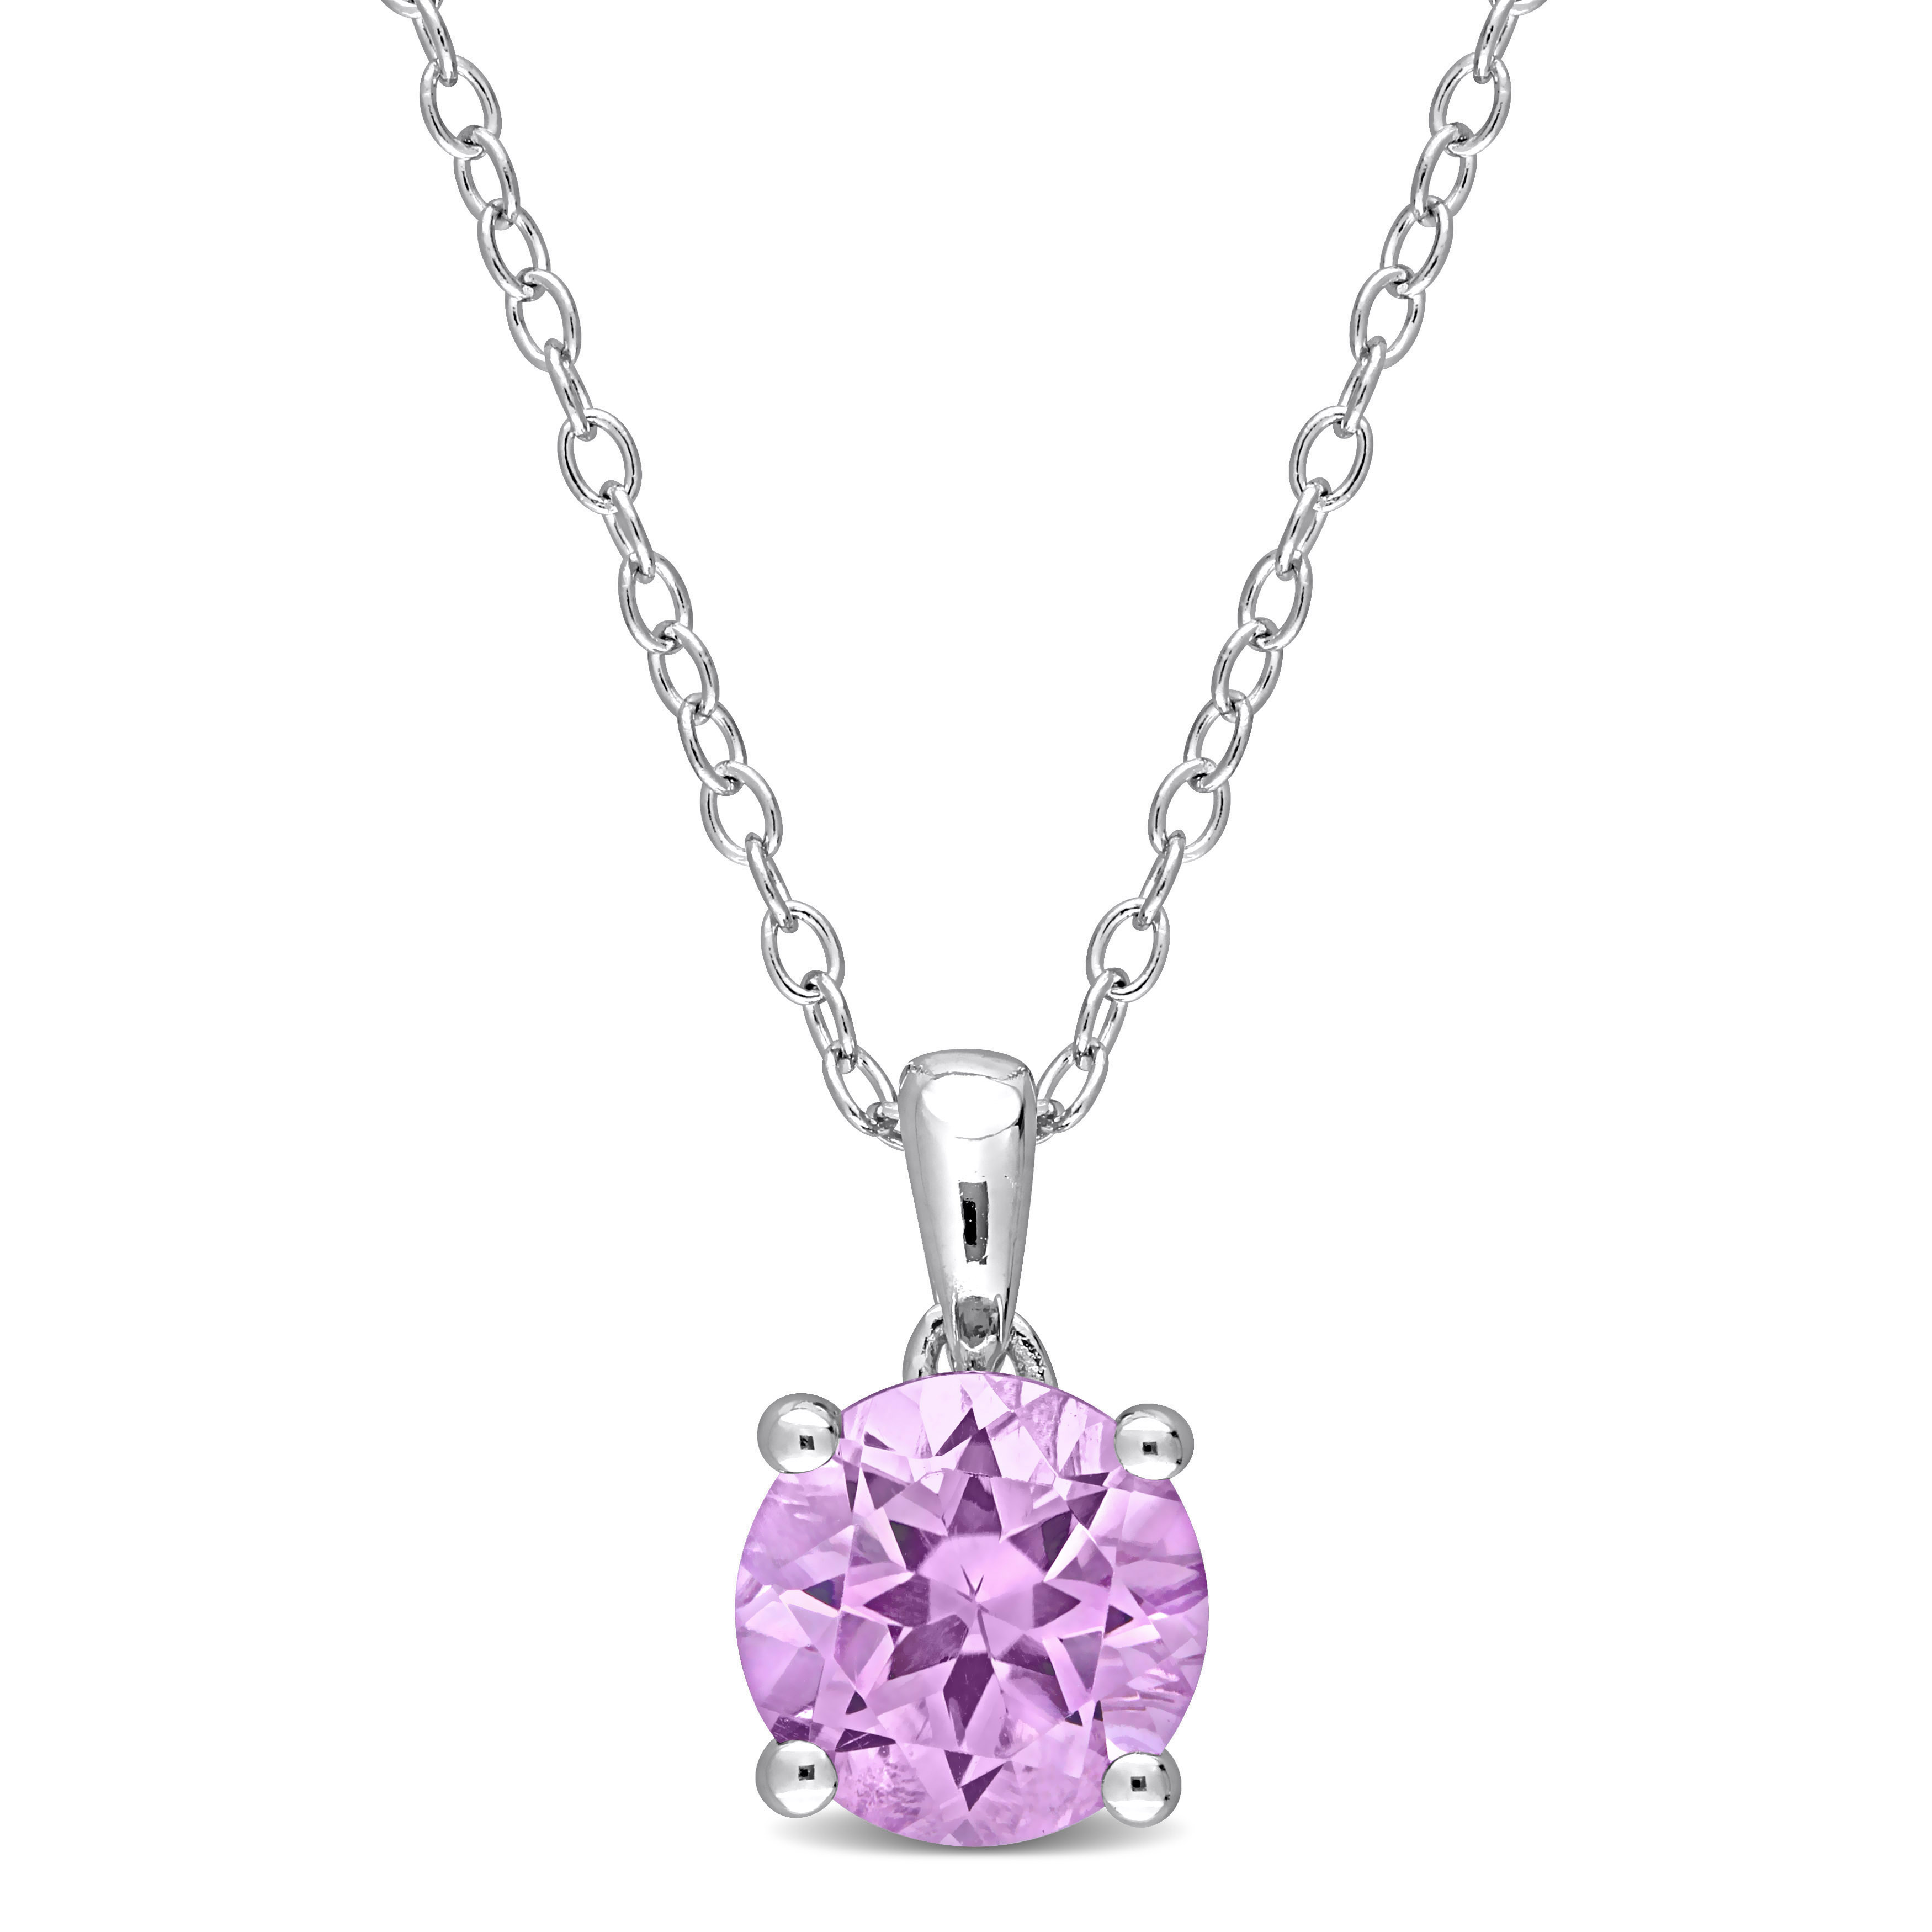 1 1/3 CT TGW Amethyst Solitaire Pendant with Chain in Sterling Silver